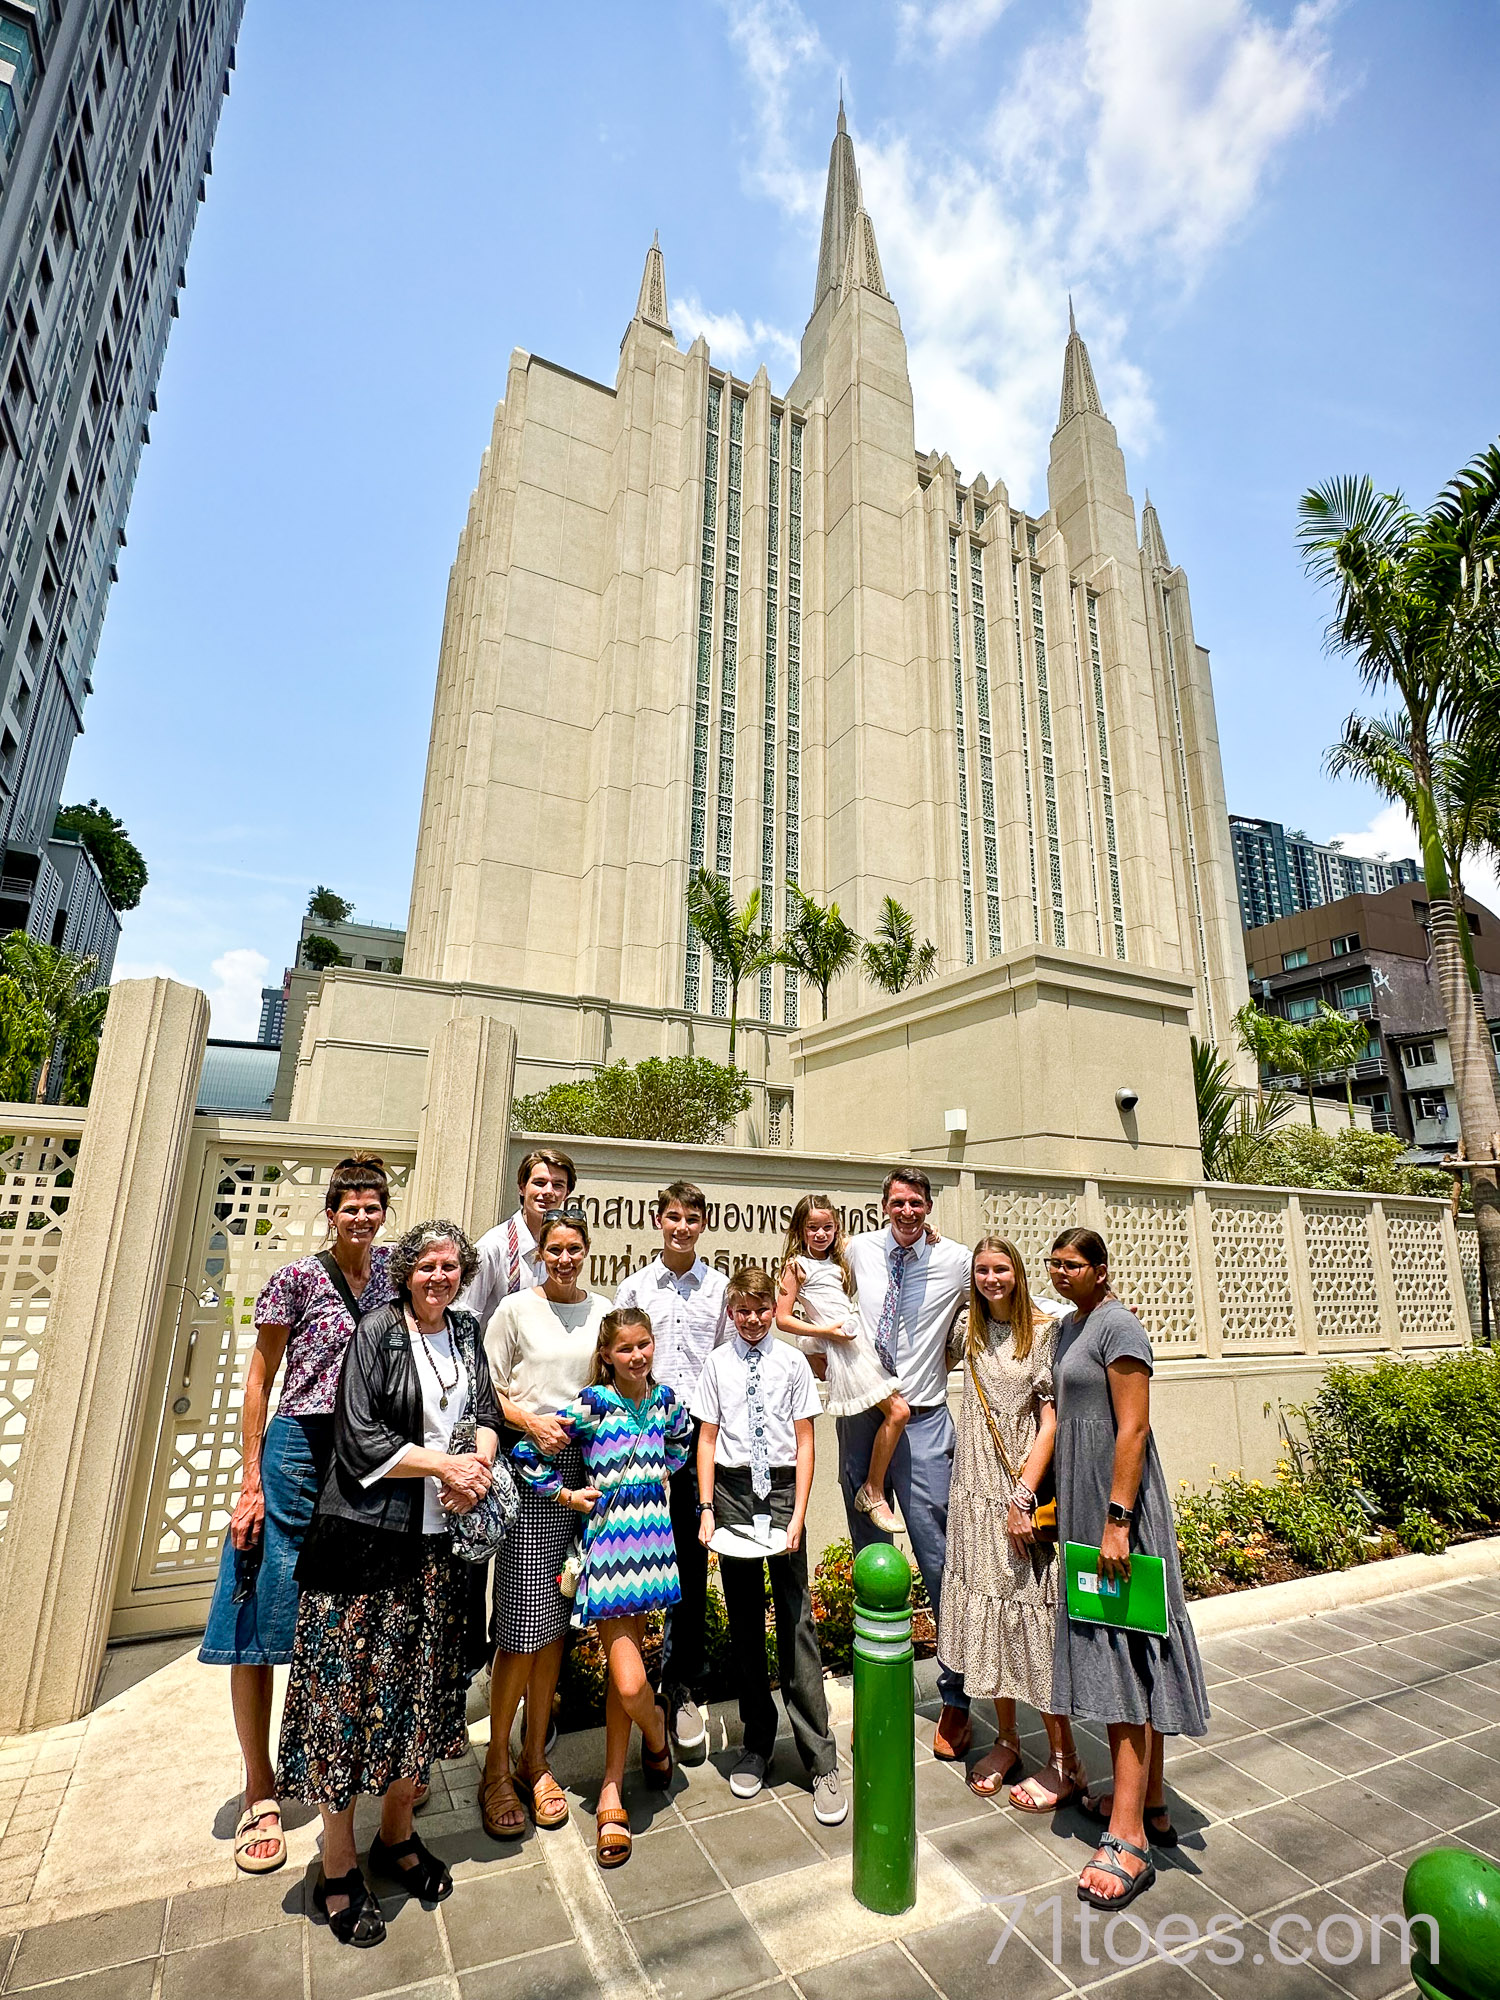 the LDS temple in Bangkok